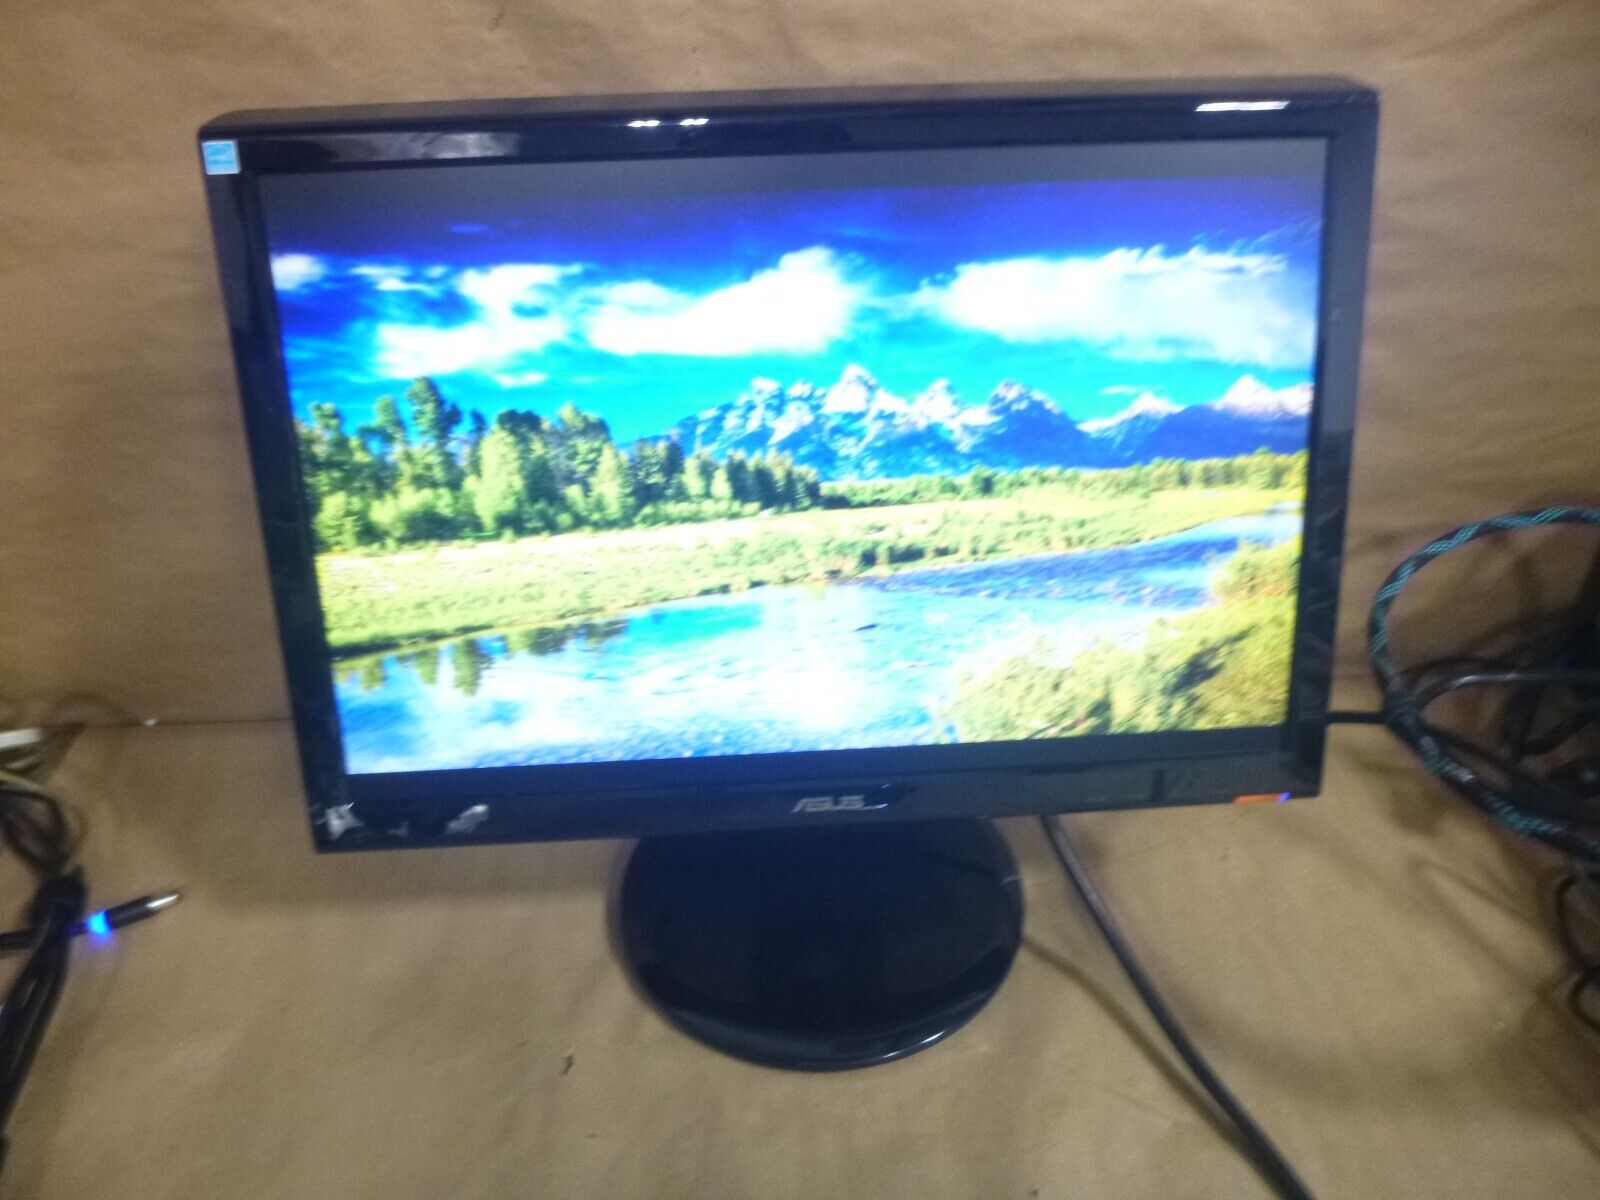 ASUS VH196T-P 19Inch Widescreen LCD Monitor - Black